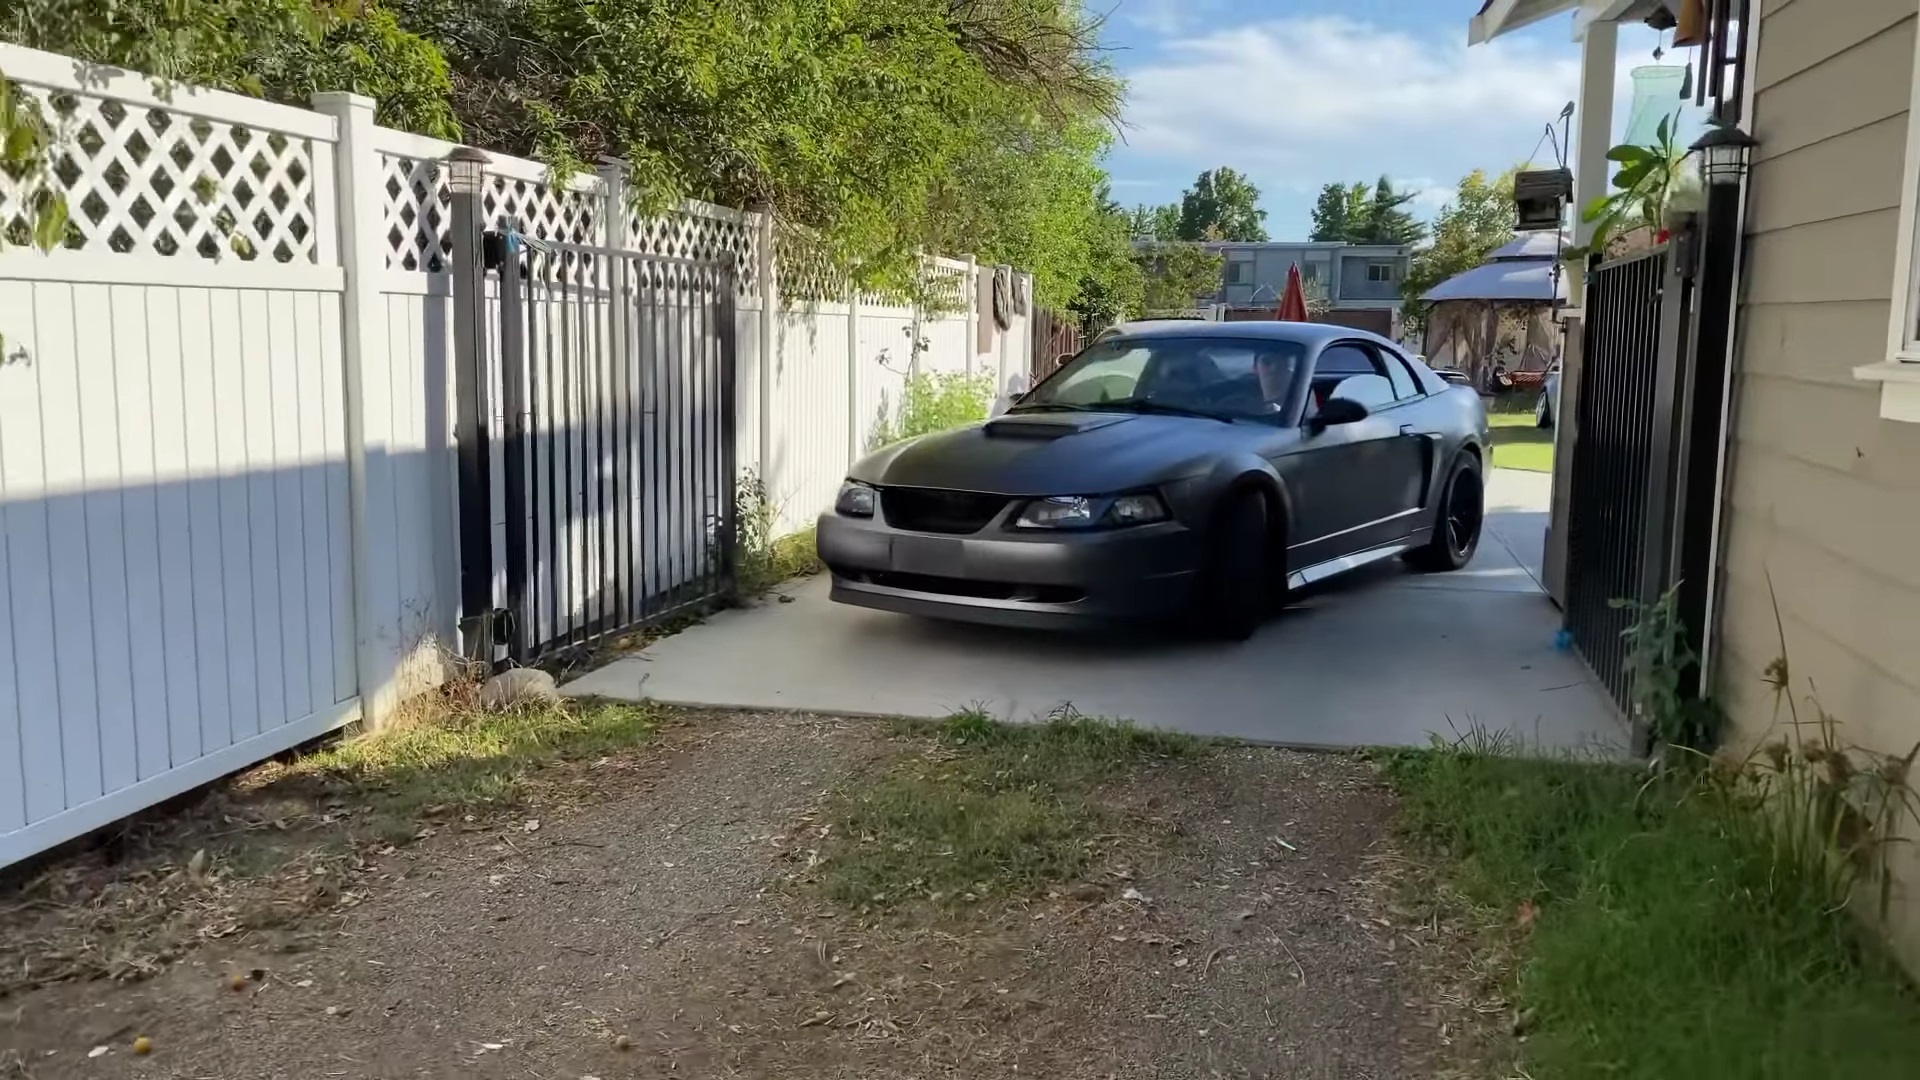 Video: Deciding Between Wrapping or Painting A 1999 Ford Mustang GT